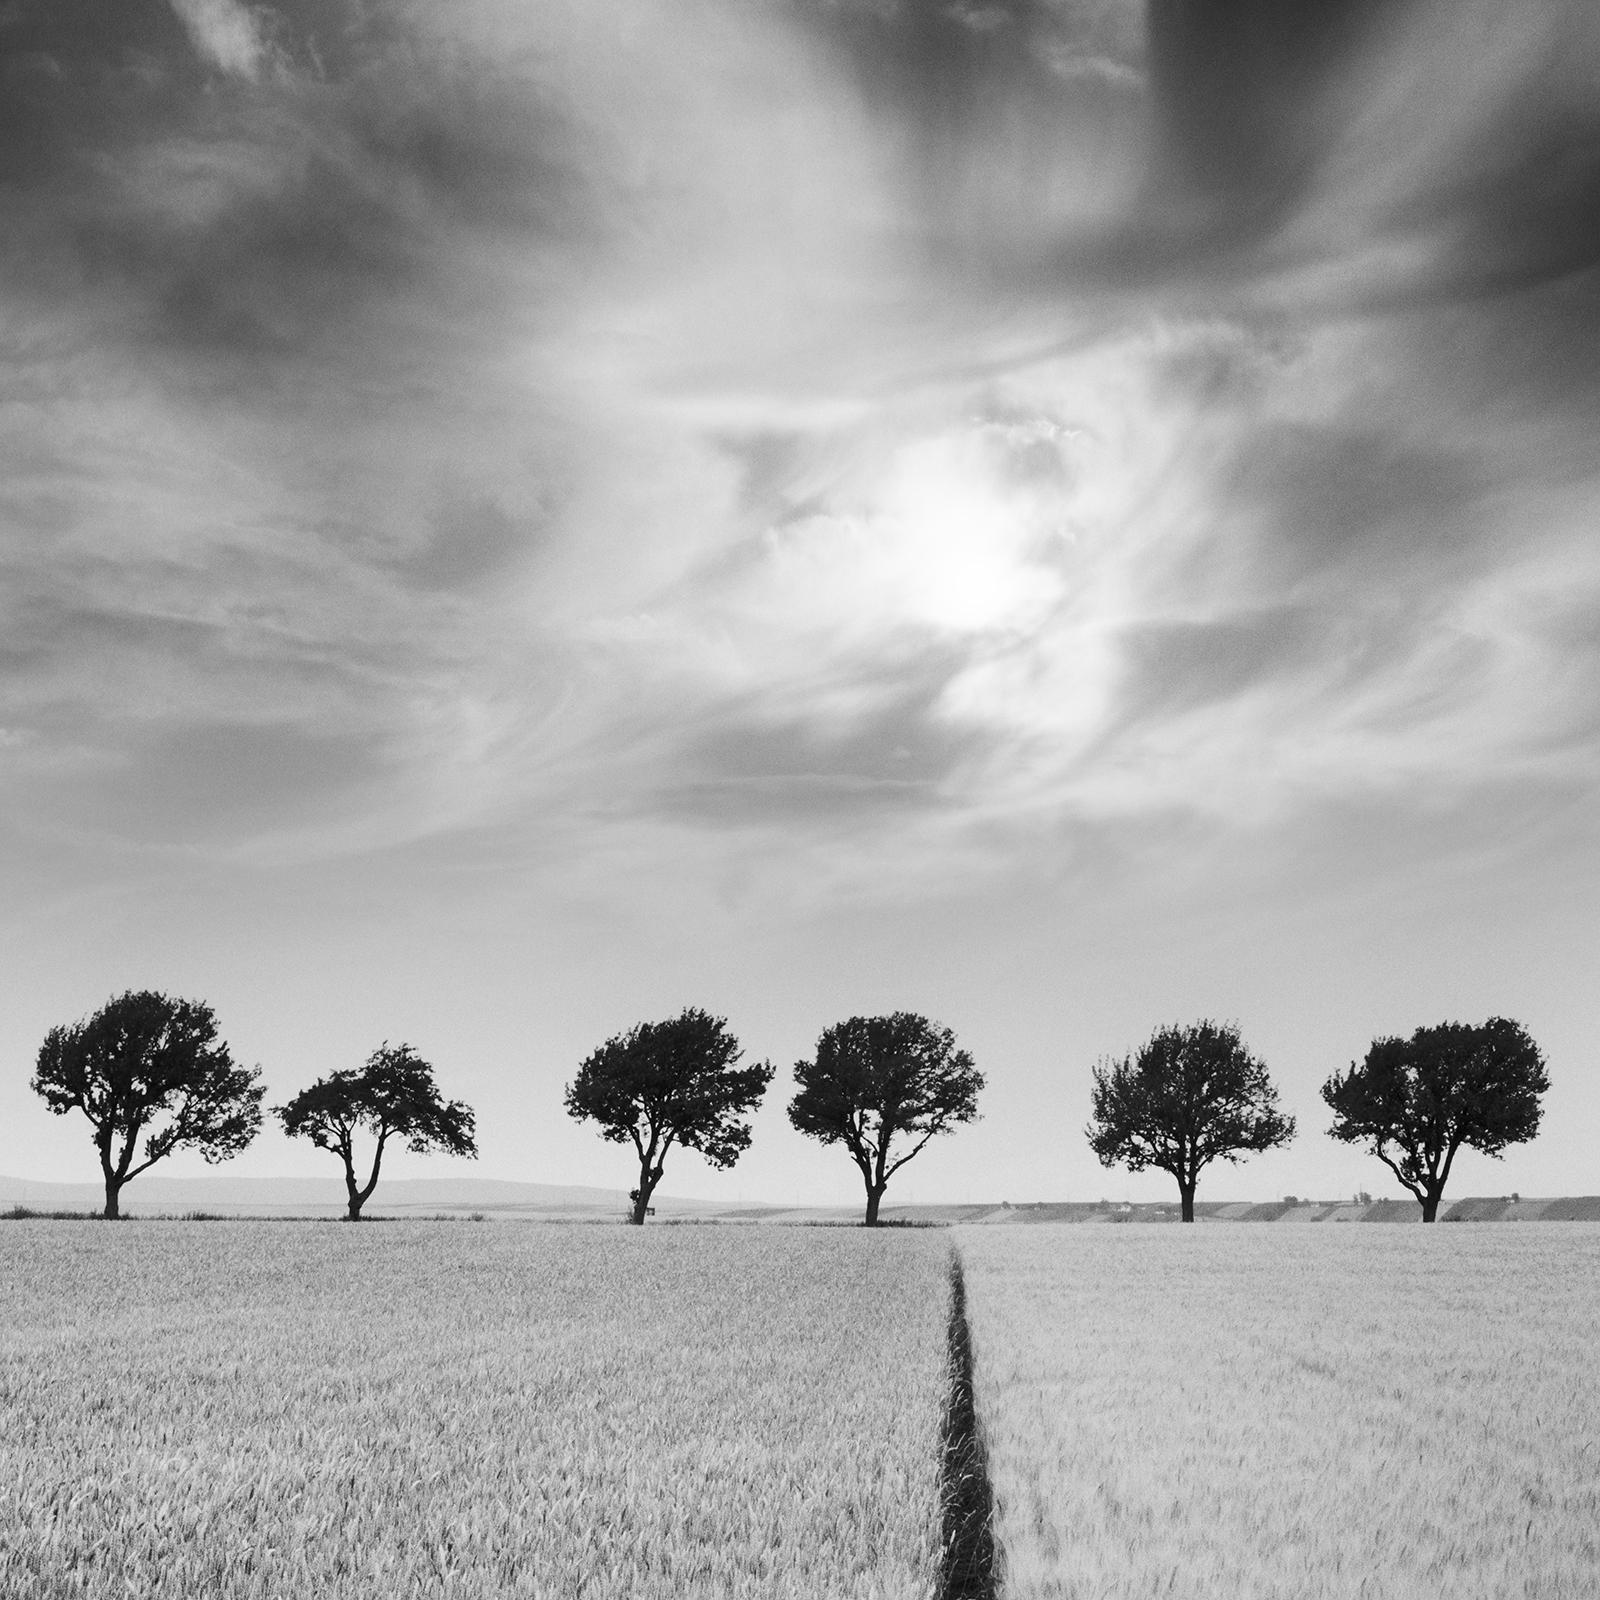 Black and White Fine Art Waterscape Photography. Row of trees at the field with big clouds, Weinviertel, Austria. Archival pigment ink print, edition of 9. Signed, titled, dated and numbered by artist. Certificate of authenticity included. Printed